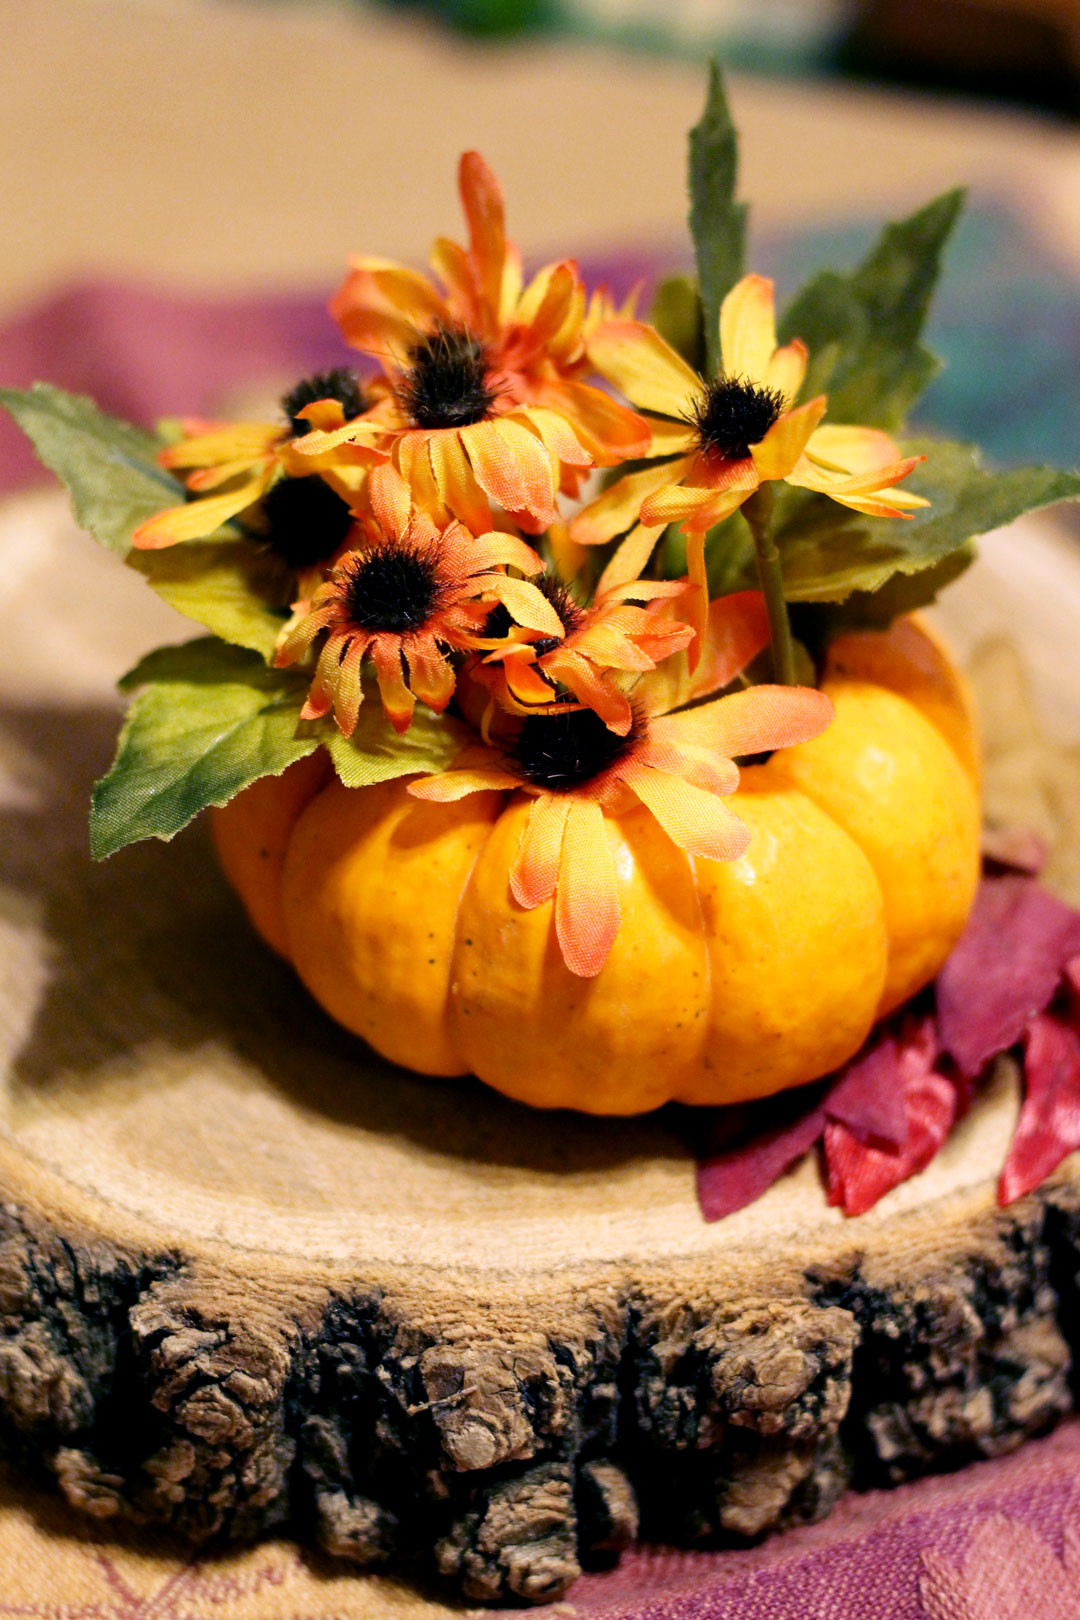 Thanksgiving Table Favors
 Make easy Thanksgiving table decorations or favors from